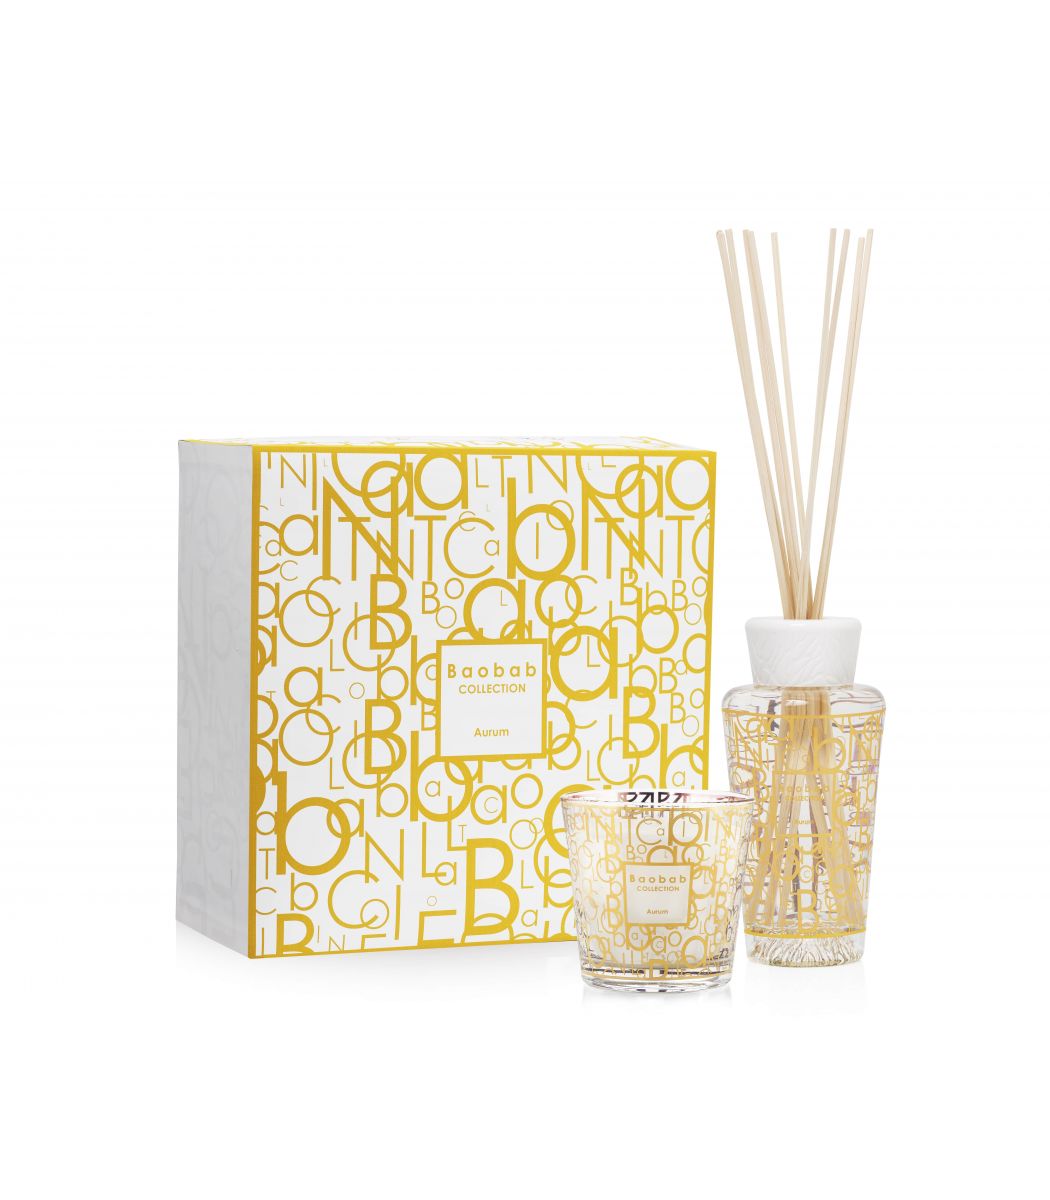 Baobab gift set. Candle and Diffuser gift set. Luxury scent. 